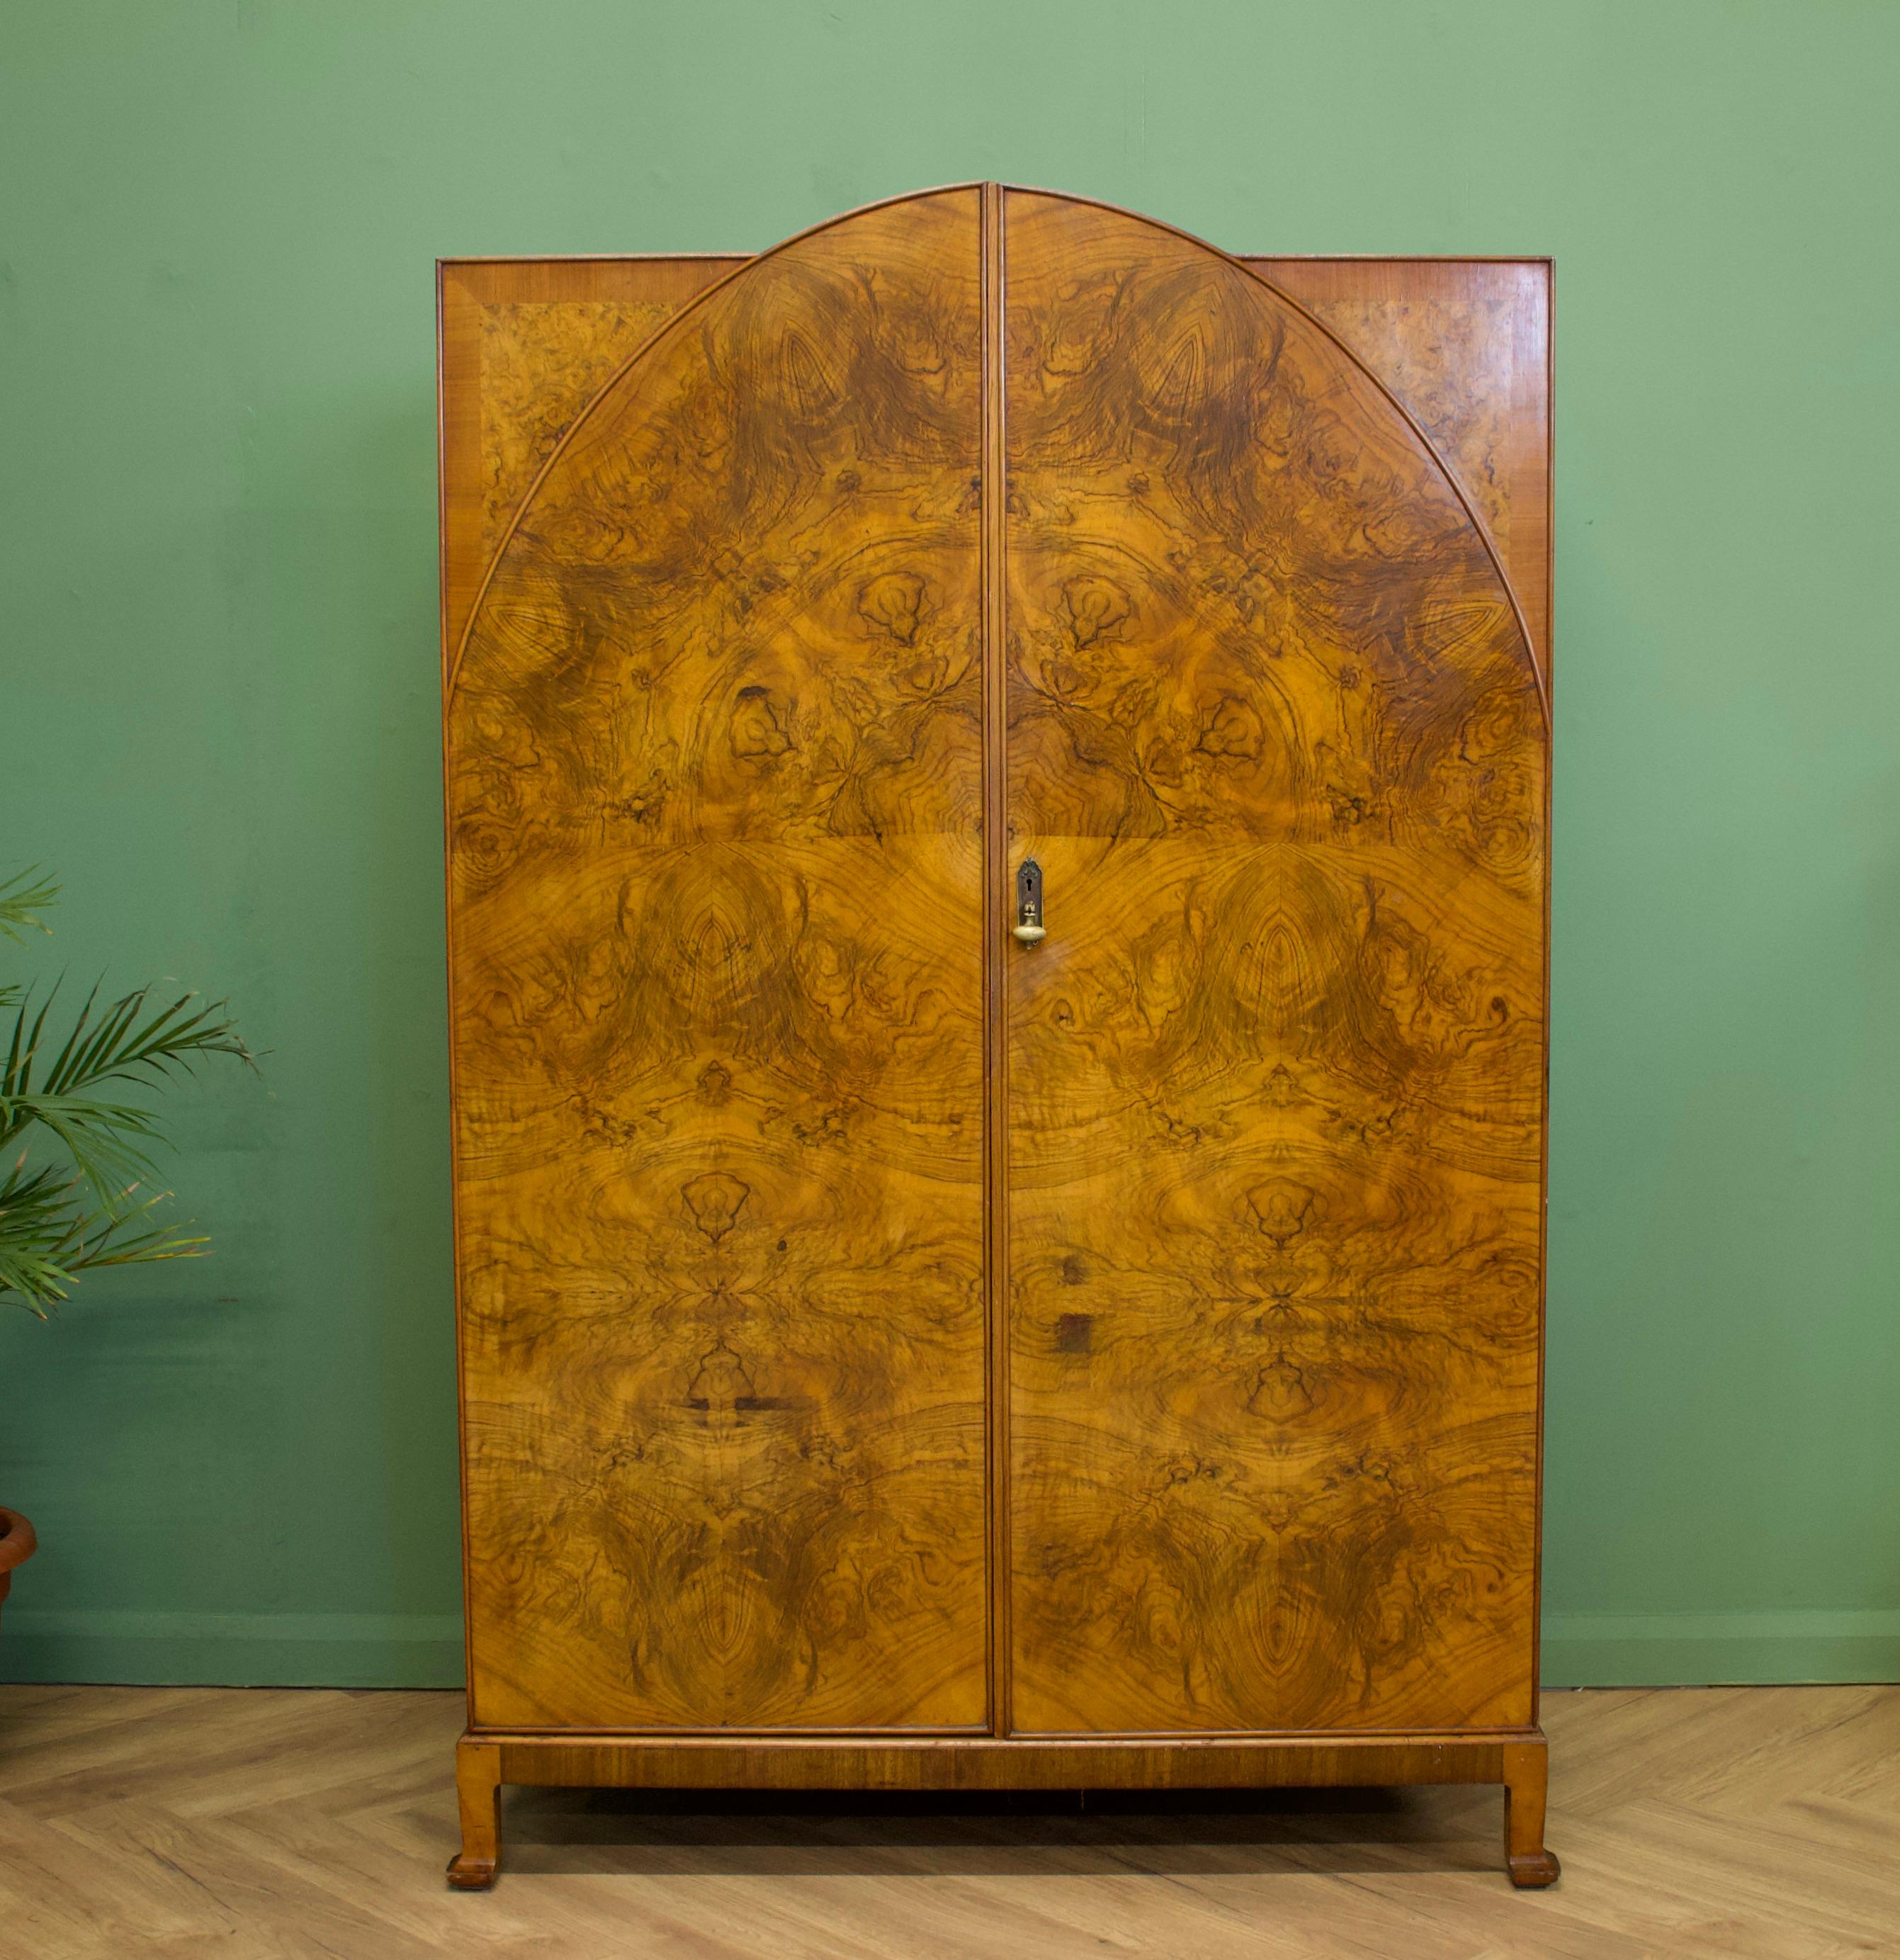 A 1920s Art Deco walnut wardrobe
Featuring a hanging rail, shoe rail, shelves and drawers
Very similar in style and quality to Waring and Gillow.